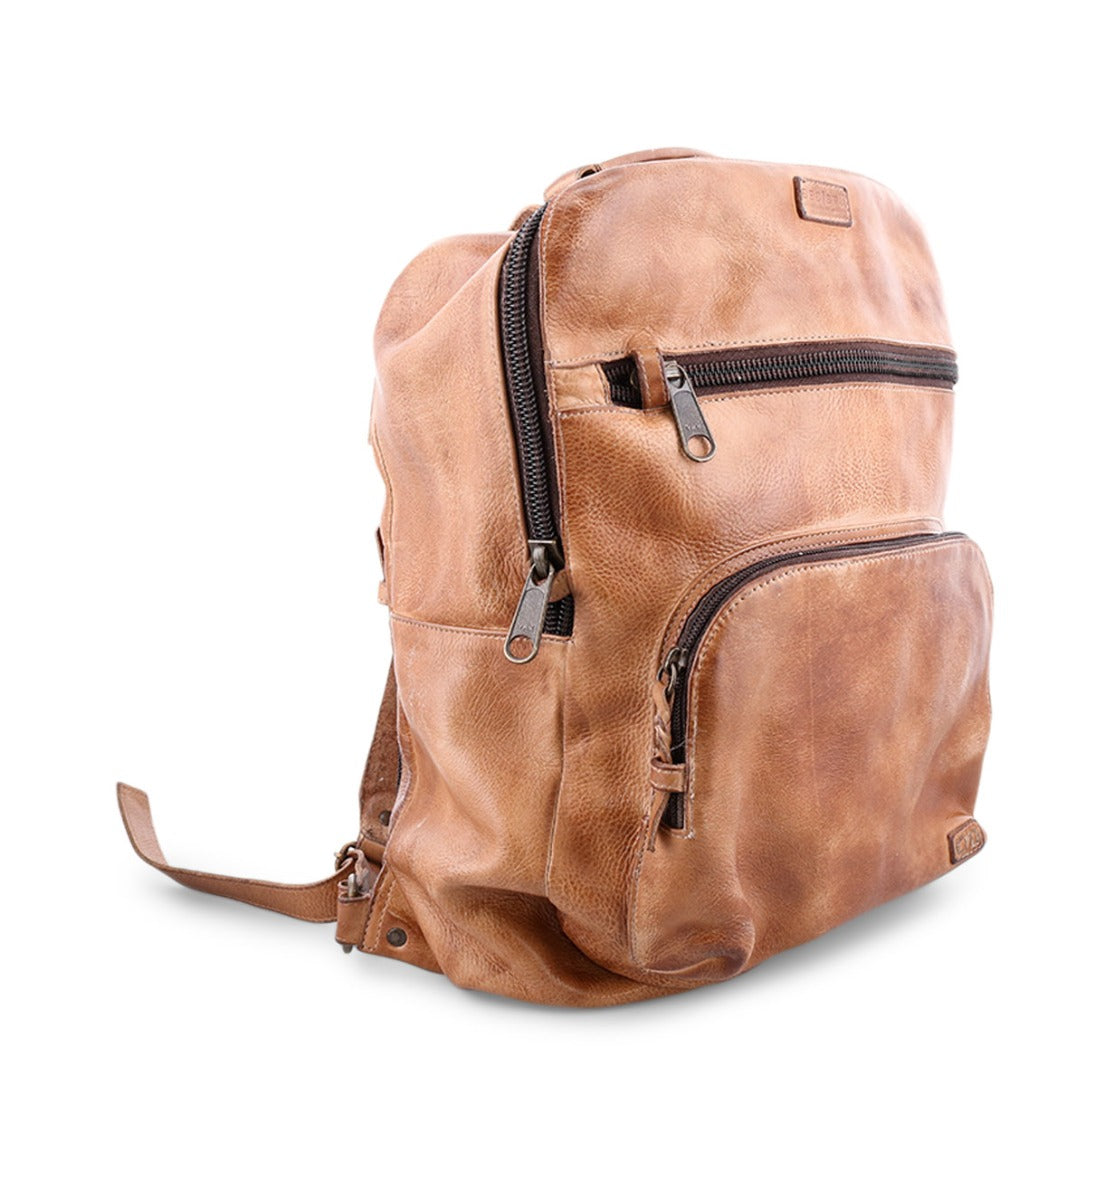 A Lafe leather backpack on a white background from the Bed Stu brand.